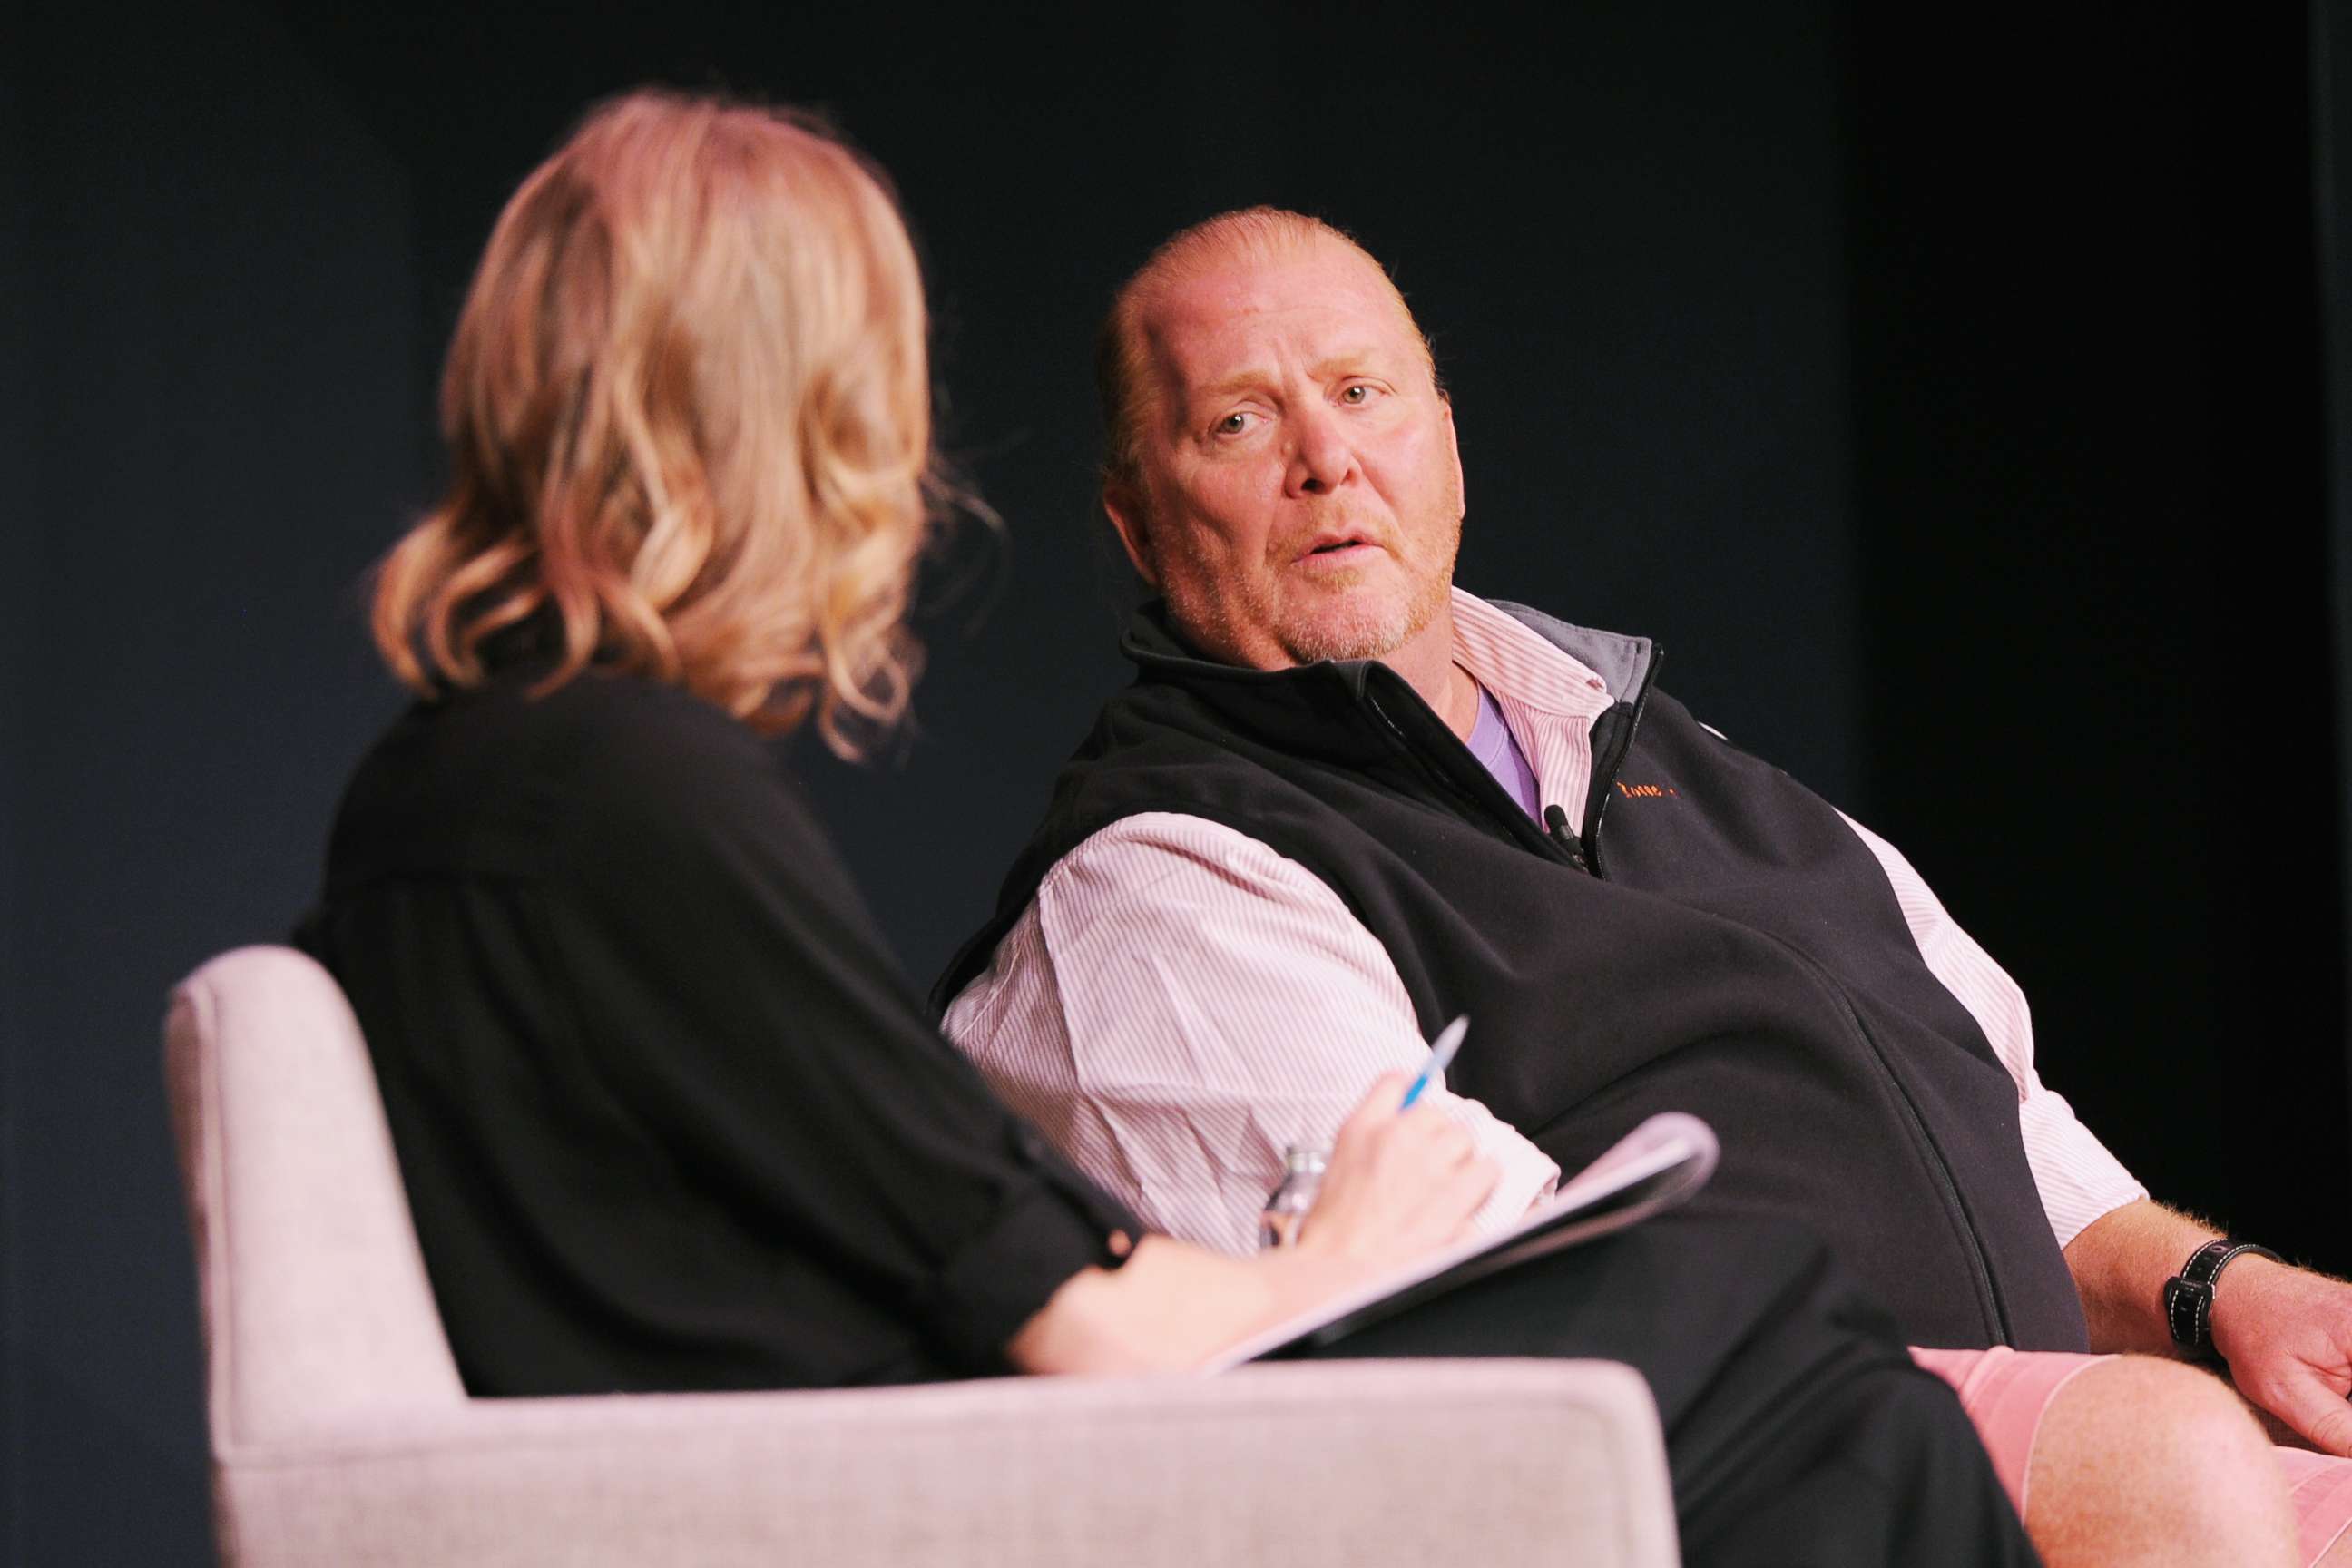 PHOTO: Famed Italian chef Mario Batali was asked to step away from "The Chew" while ABC reviews sexual misconduct allegations.